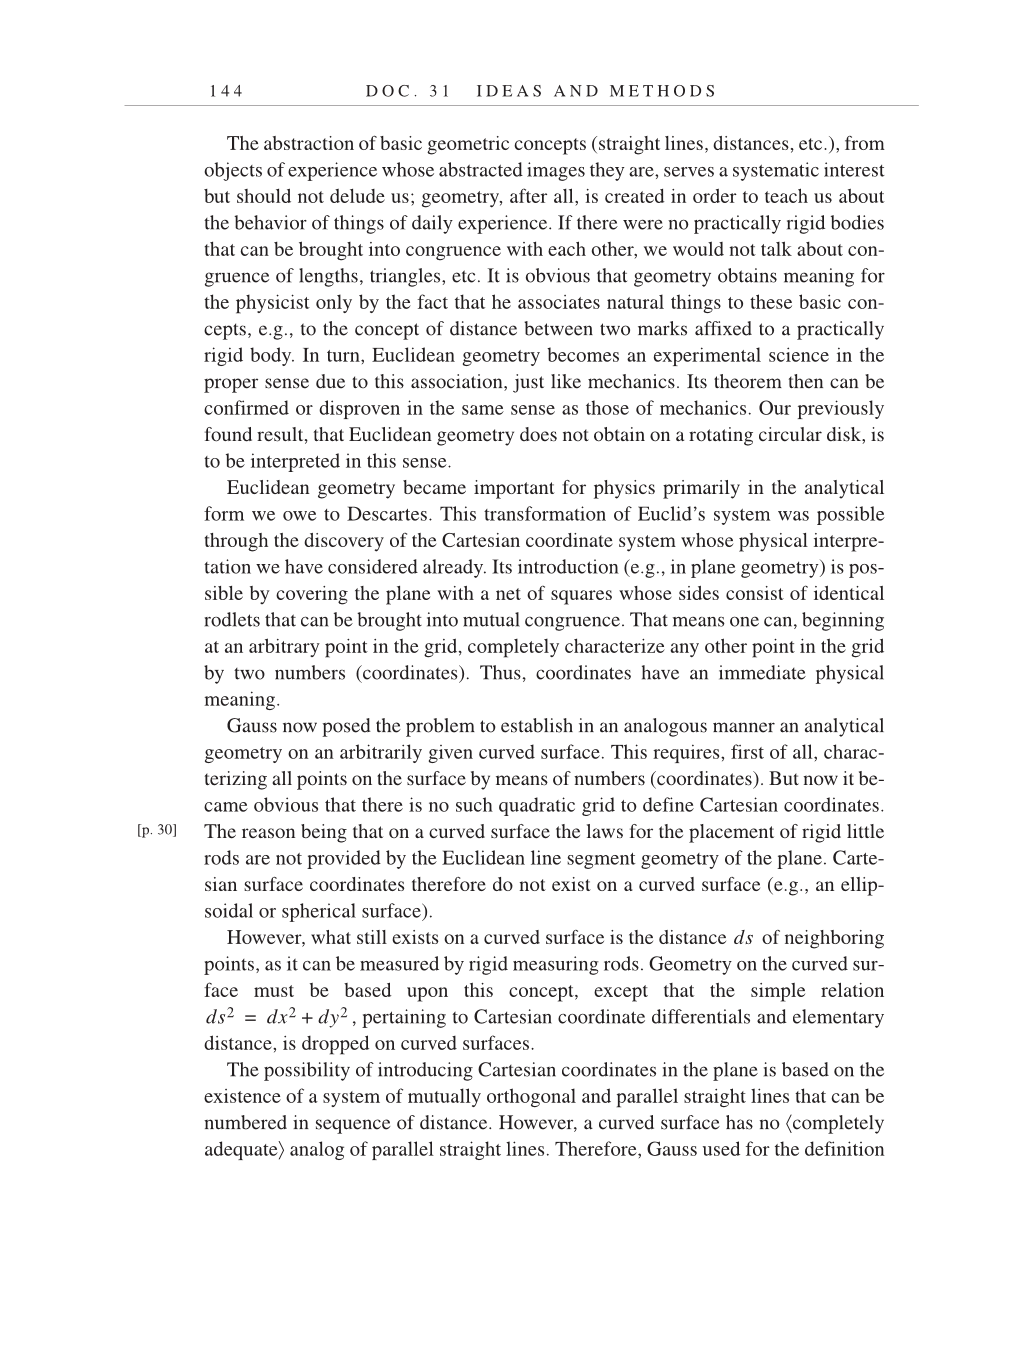 Volume 7: The Berlin Years: Writings, 1918-1921 (English translation supplement) page 144